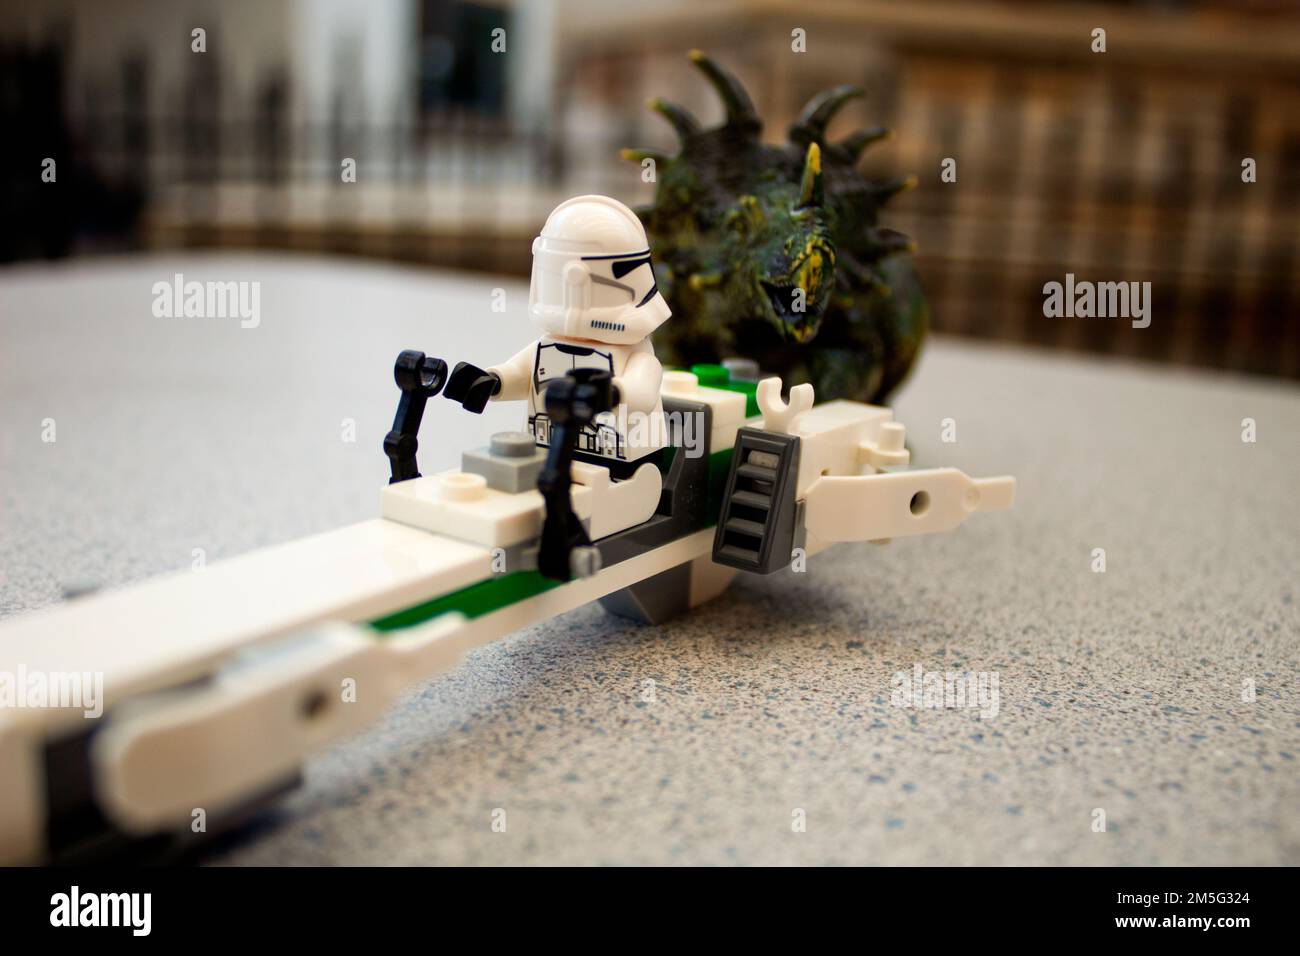 Toy Dinosaur Approaching Lego Star Wars Storm Trooper Stock Photo